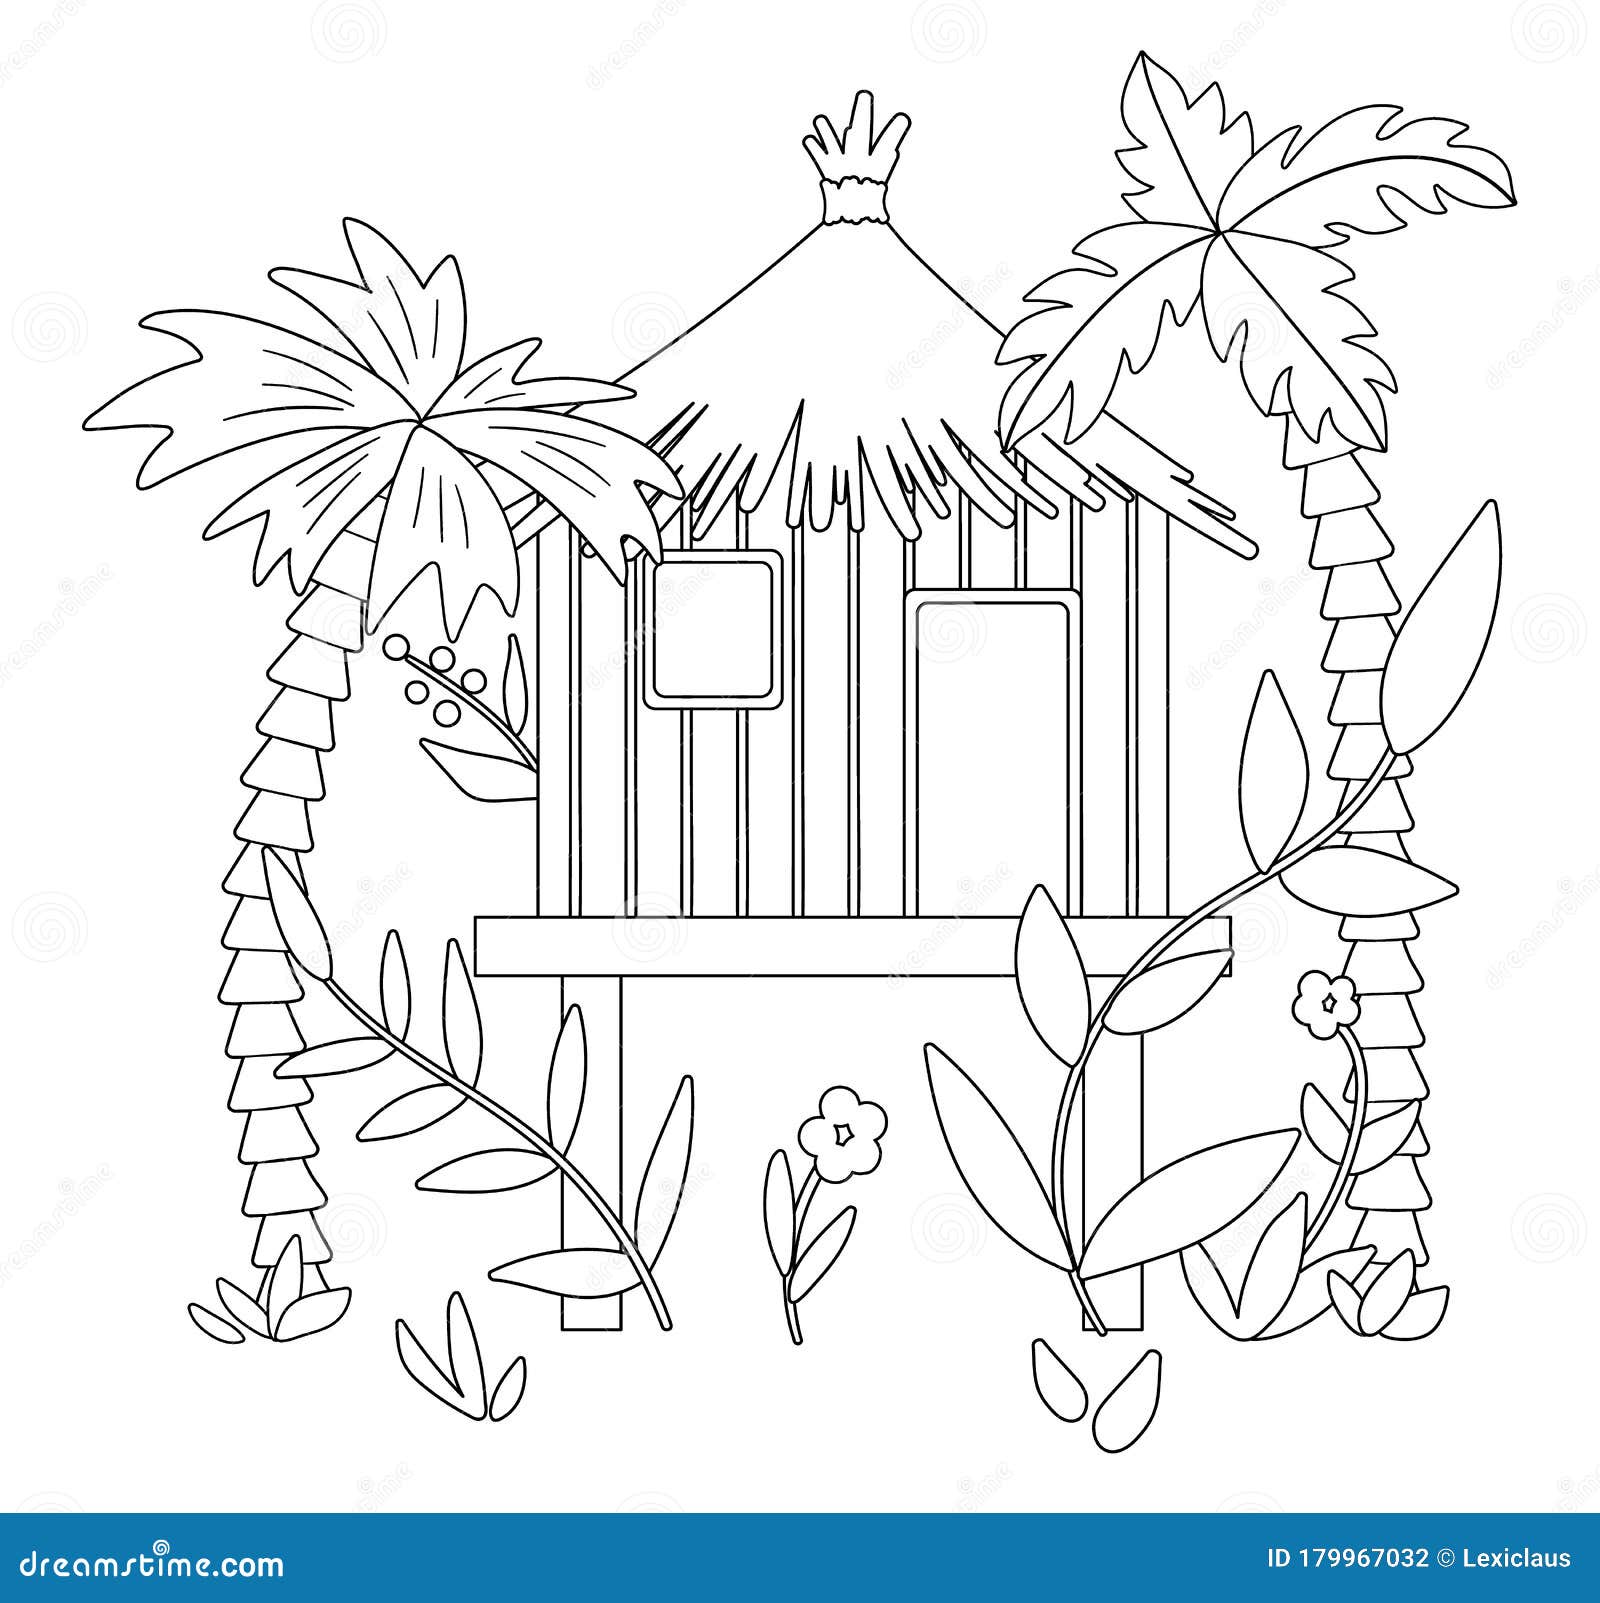 Download Vector Black And White Illustration Of Jungle Hoot With ...